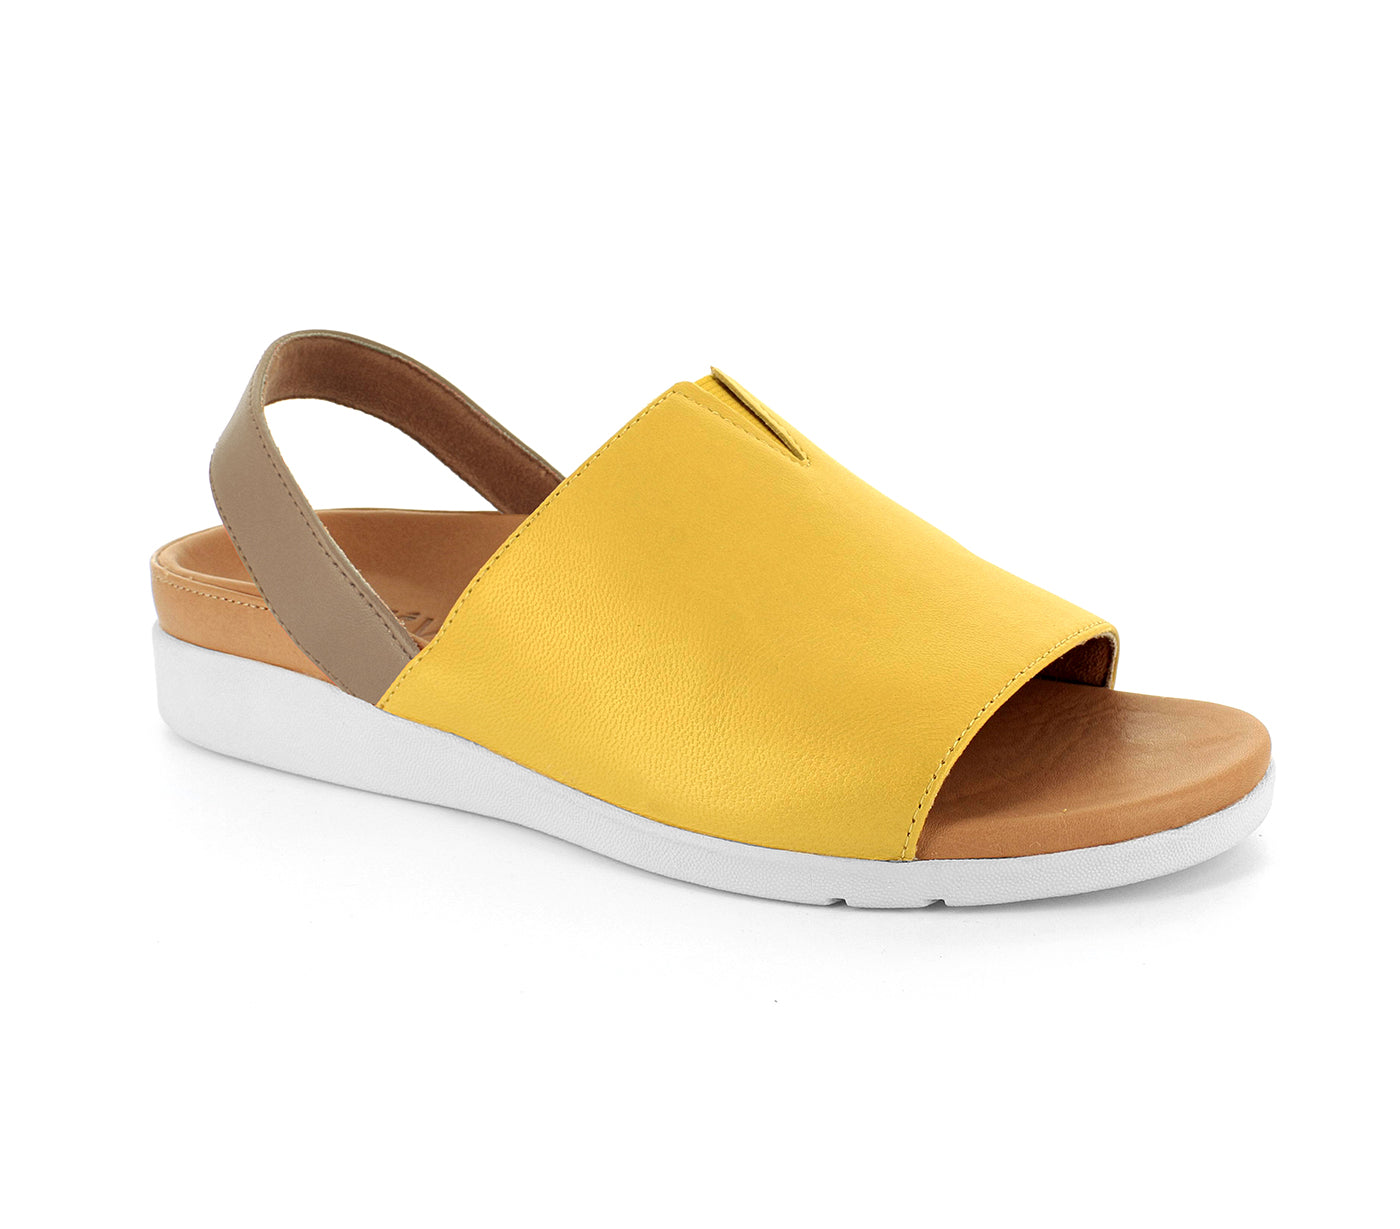 SALE - Strive Mara Sandal with Arch Support - Honey Gold